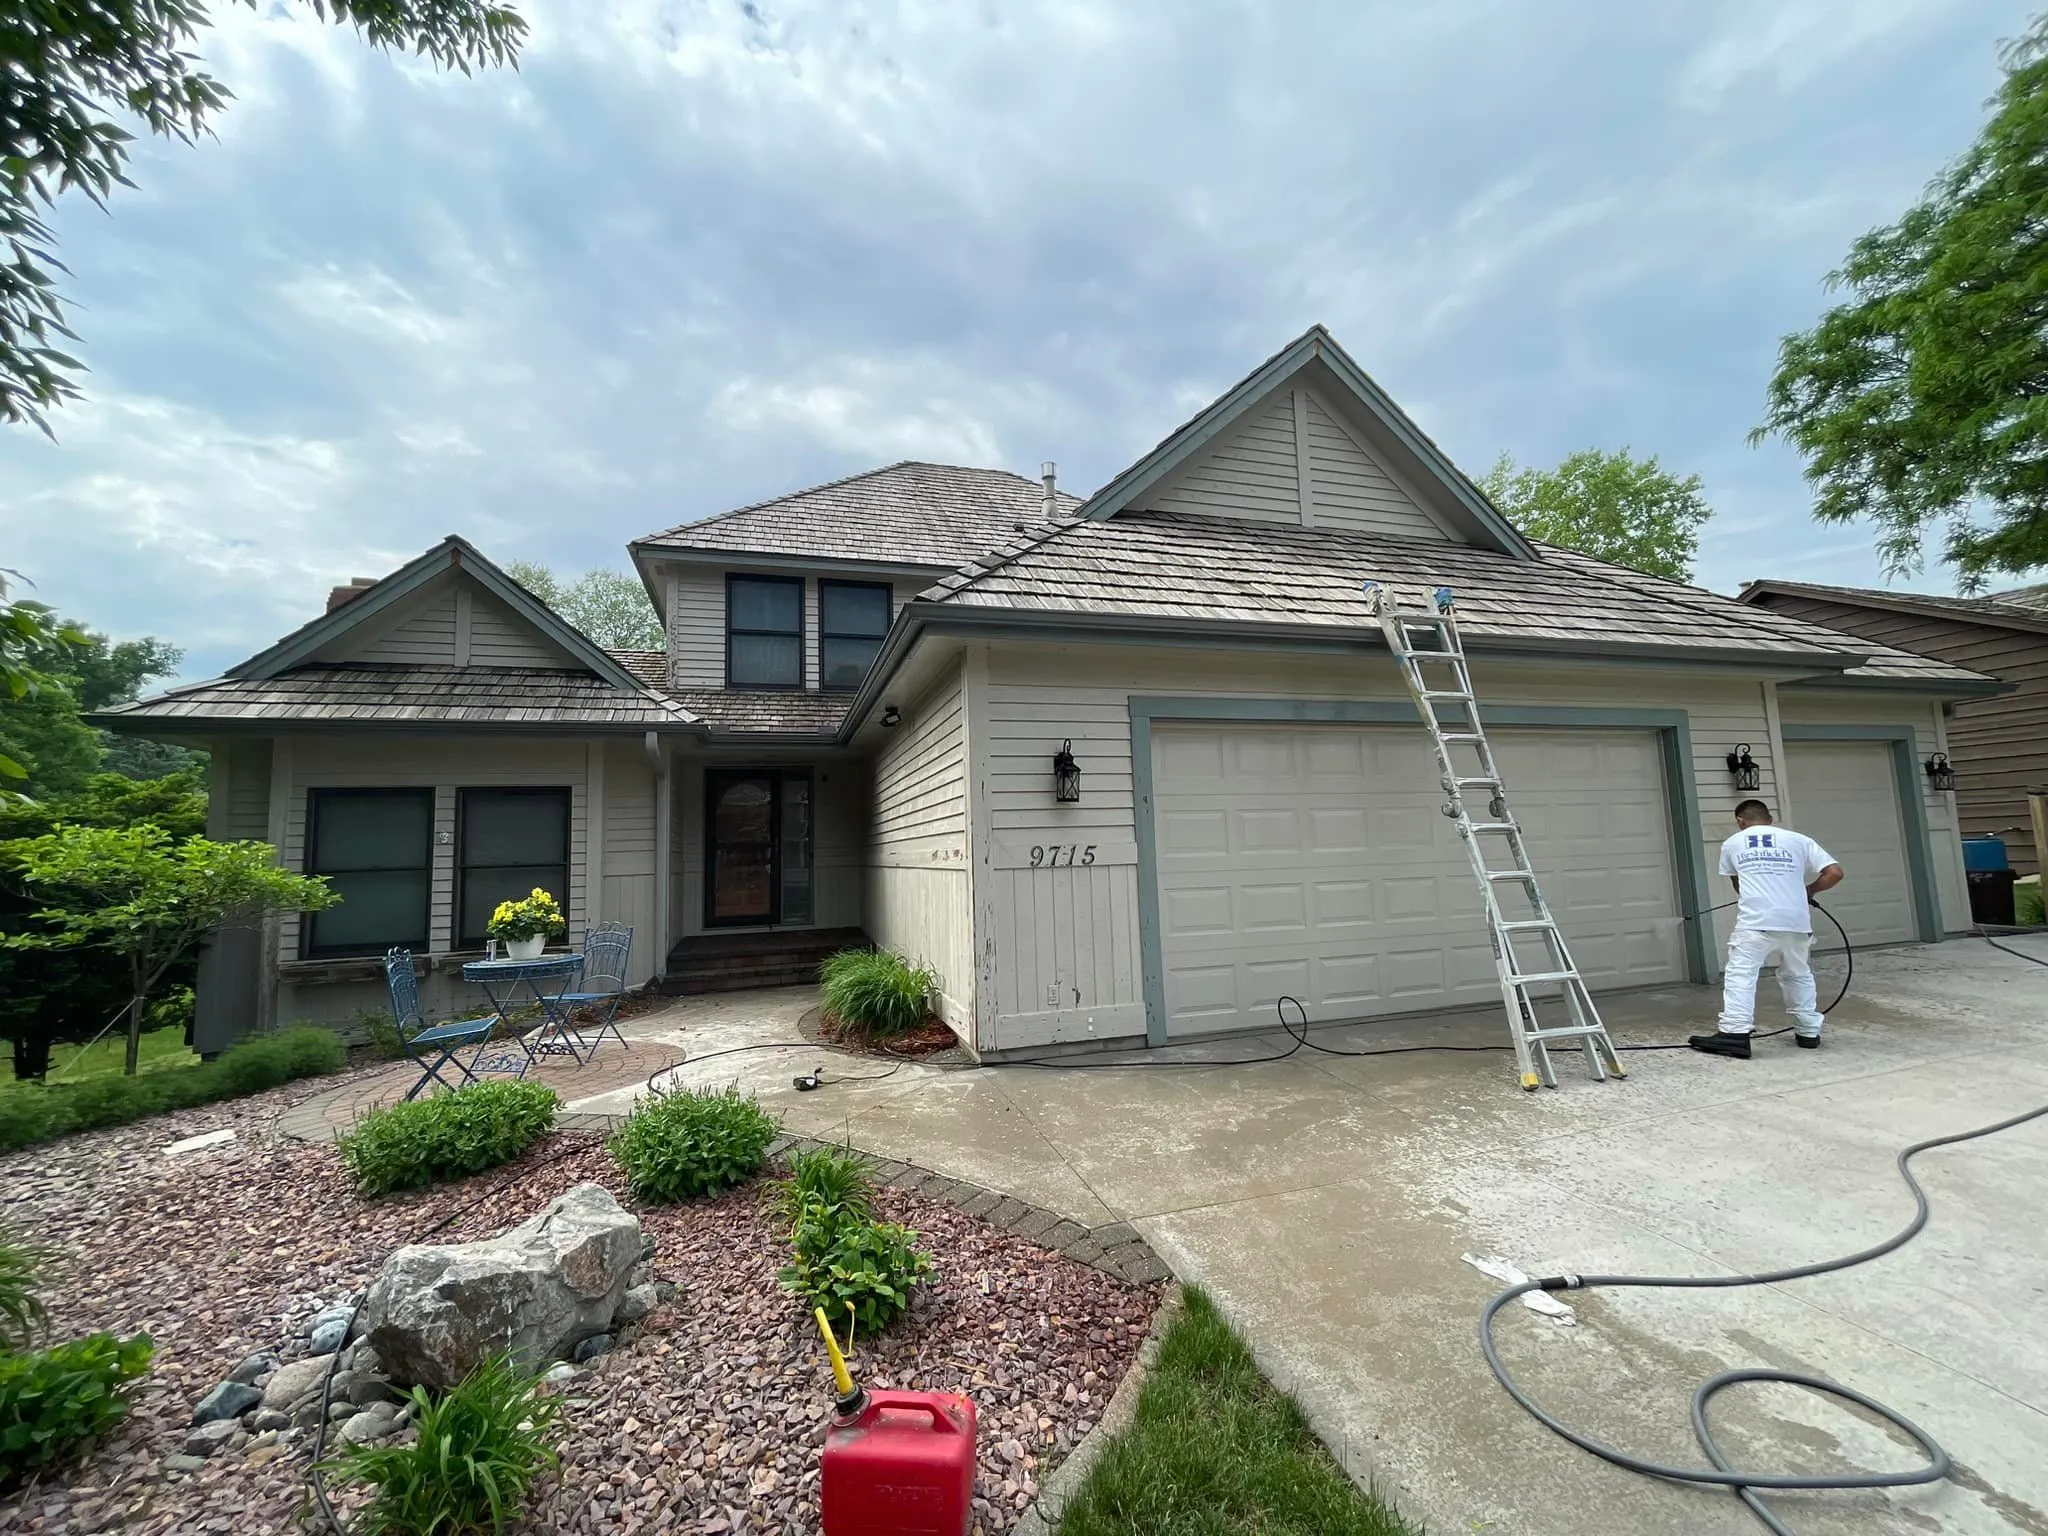 Exterior Painting for TC Paints in Minneapolis, Minnesota